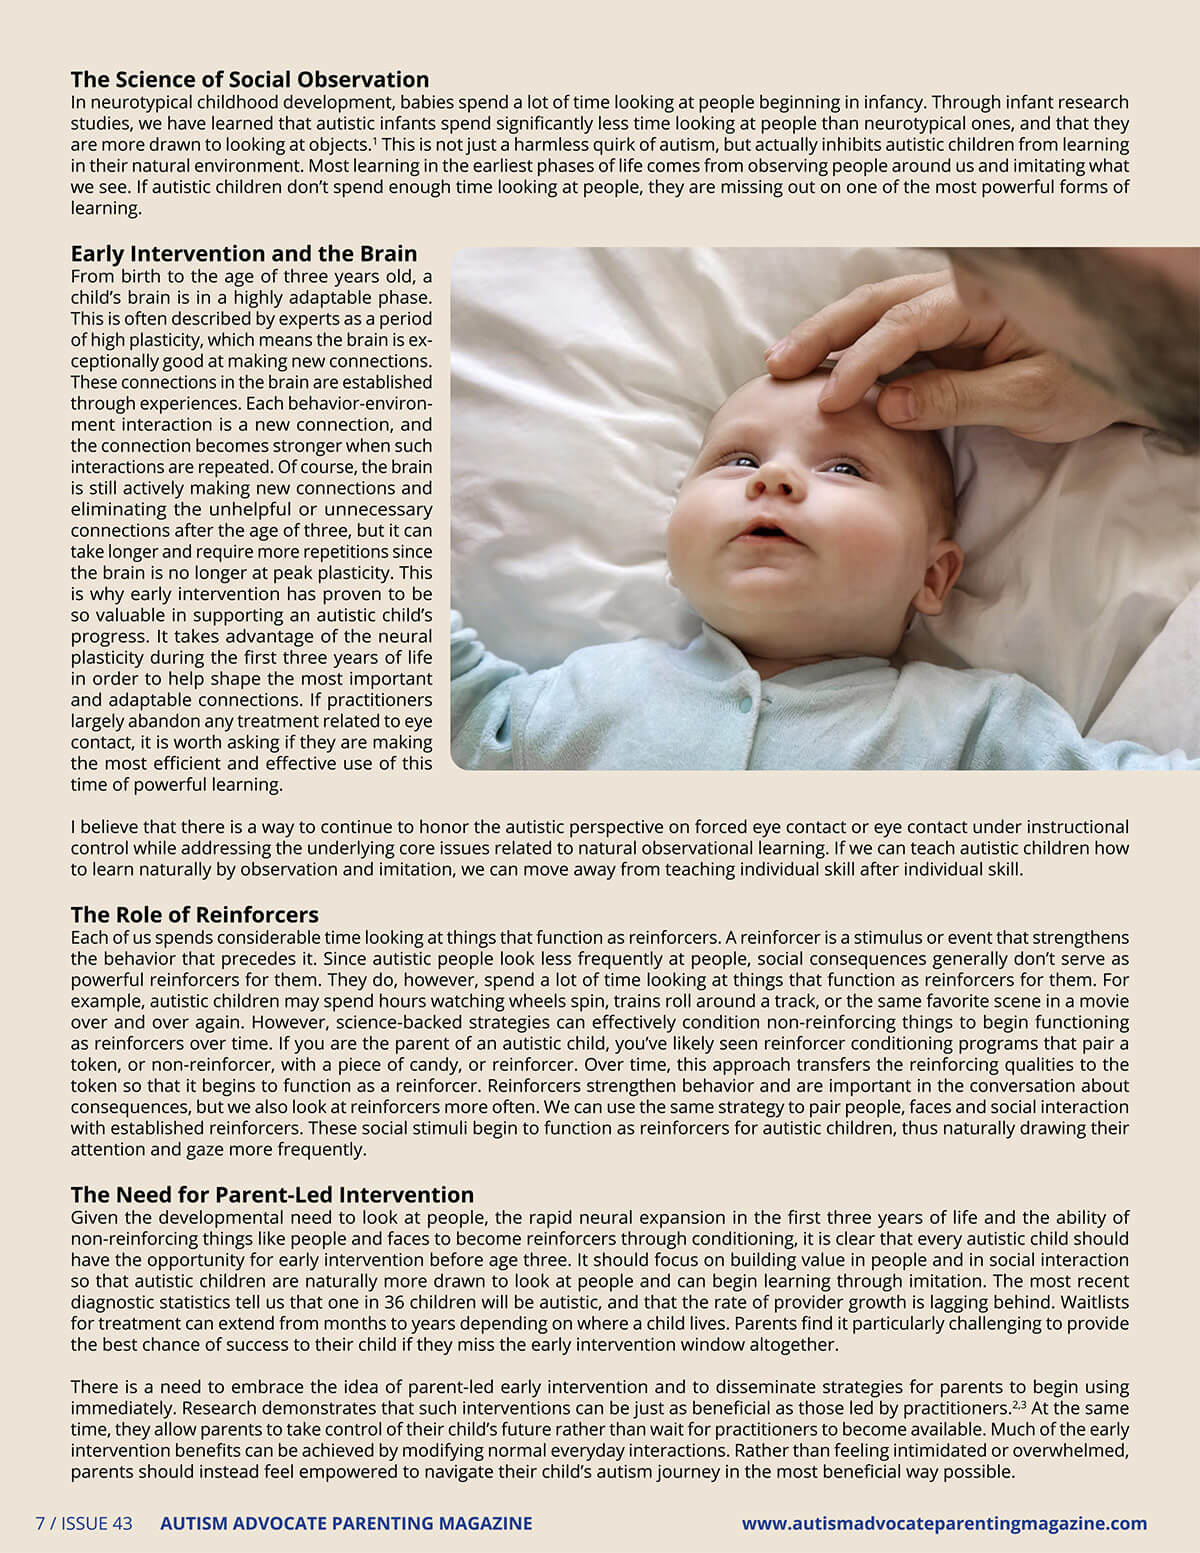 Second page of an article detailing 'The Science of Social Observation' and the impact of early intervention on brain development in autism. It includes an image of an infant gazing upward while lying on a blanket, exemplifying early life learning and observation. Published in Autism Advocate Parenting Magazine, Issue 43.